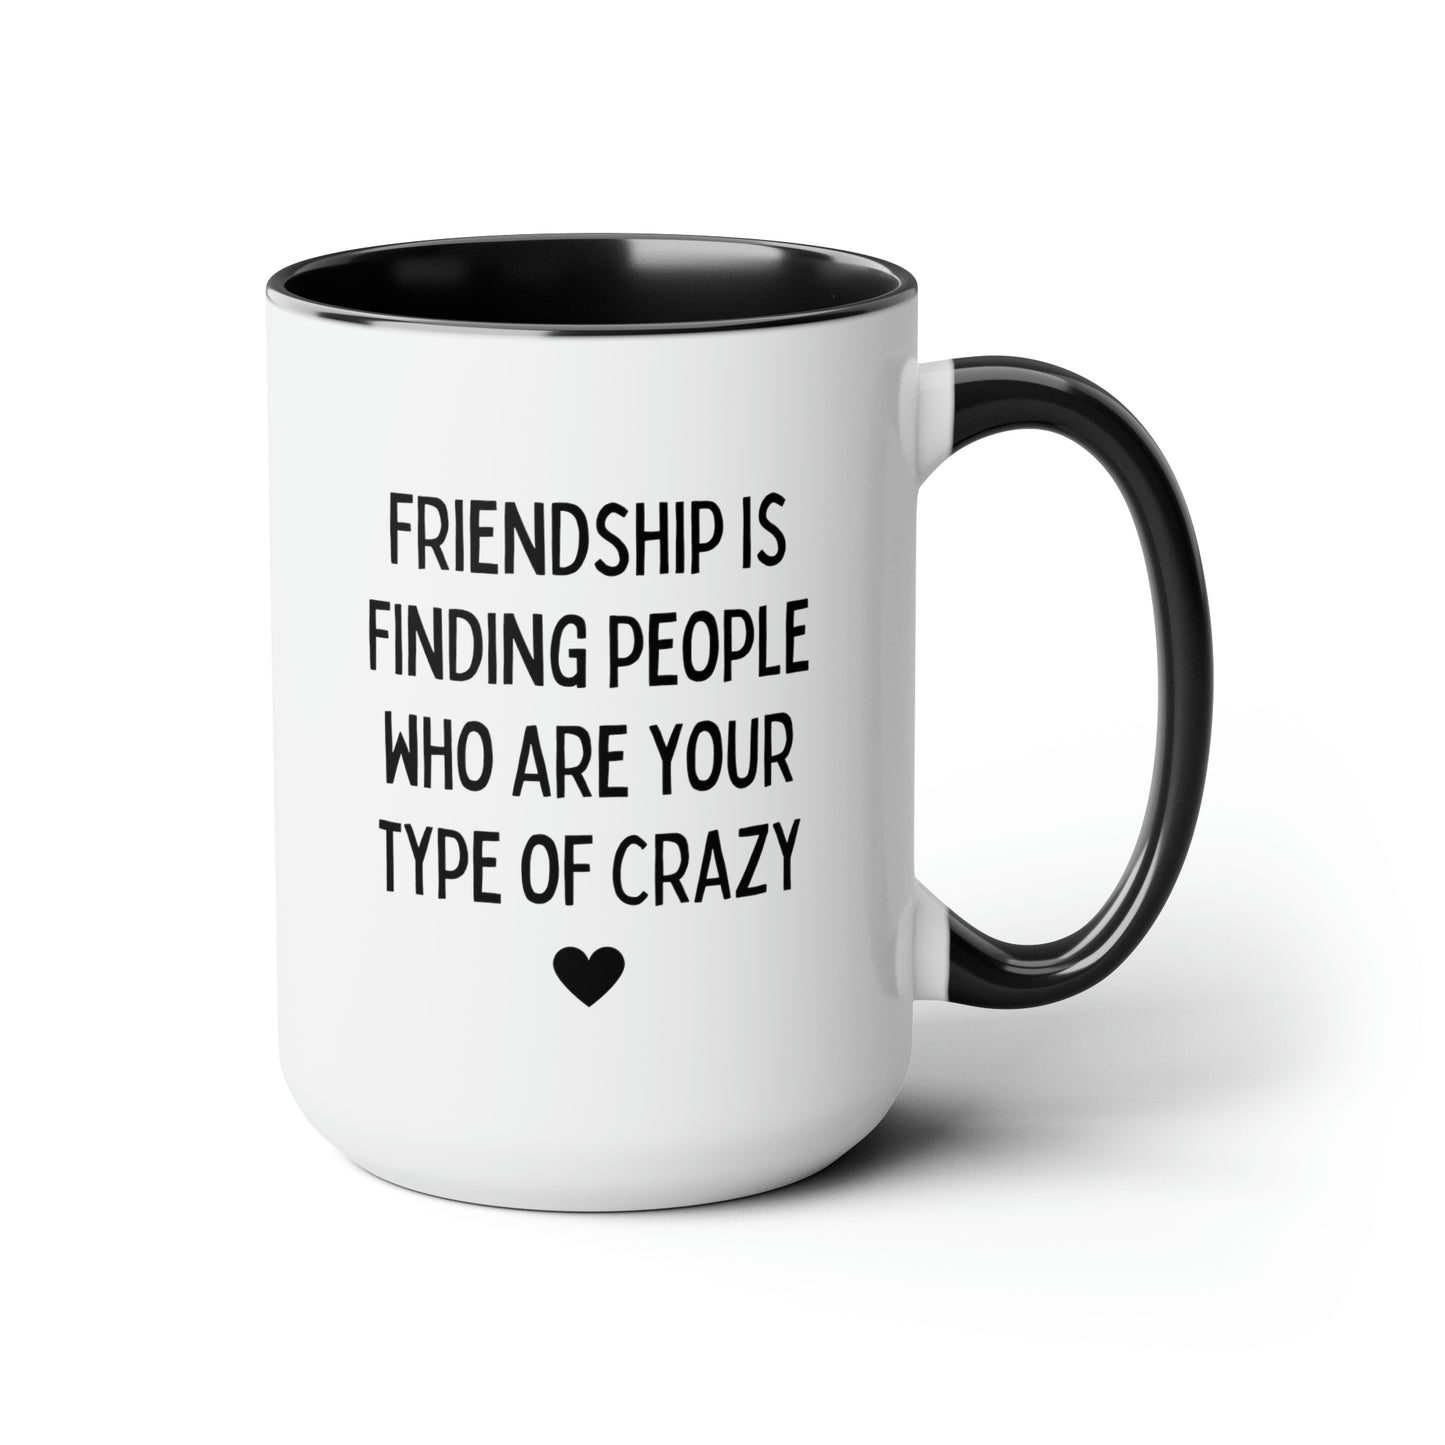 Friendship Is Finding People Who Are Your Type Of Crazy 15oz white with black accent funny large coffee mug gift for best friend friendship decor BFF Bestie tea cup waveywares wavey wares wavywares wavy wares